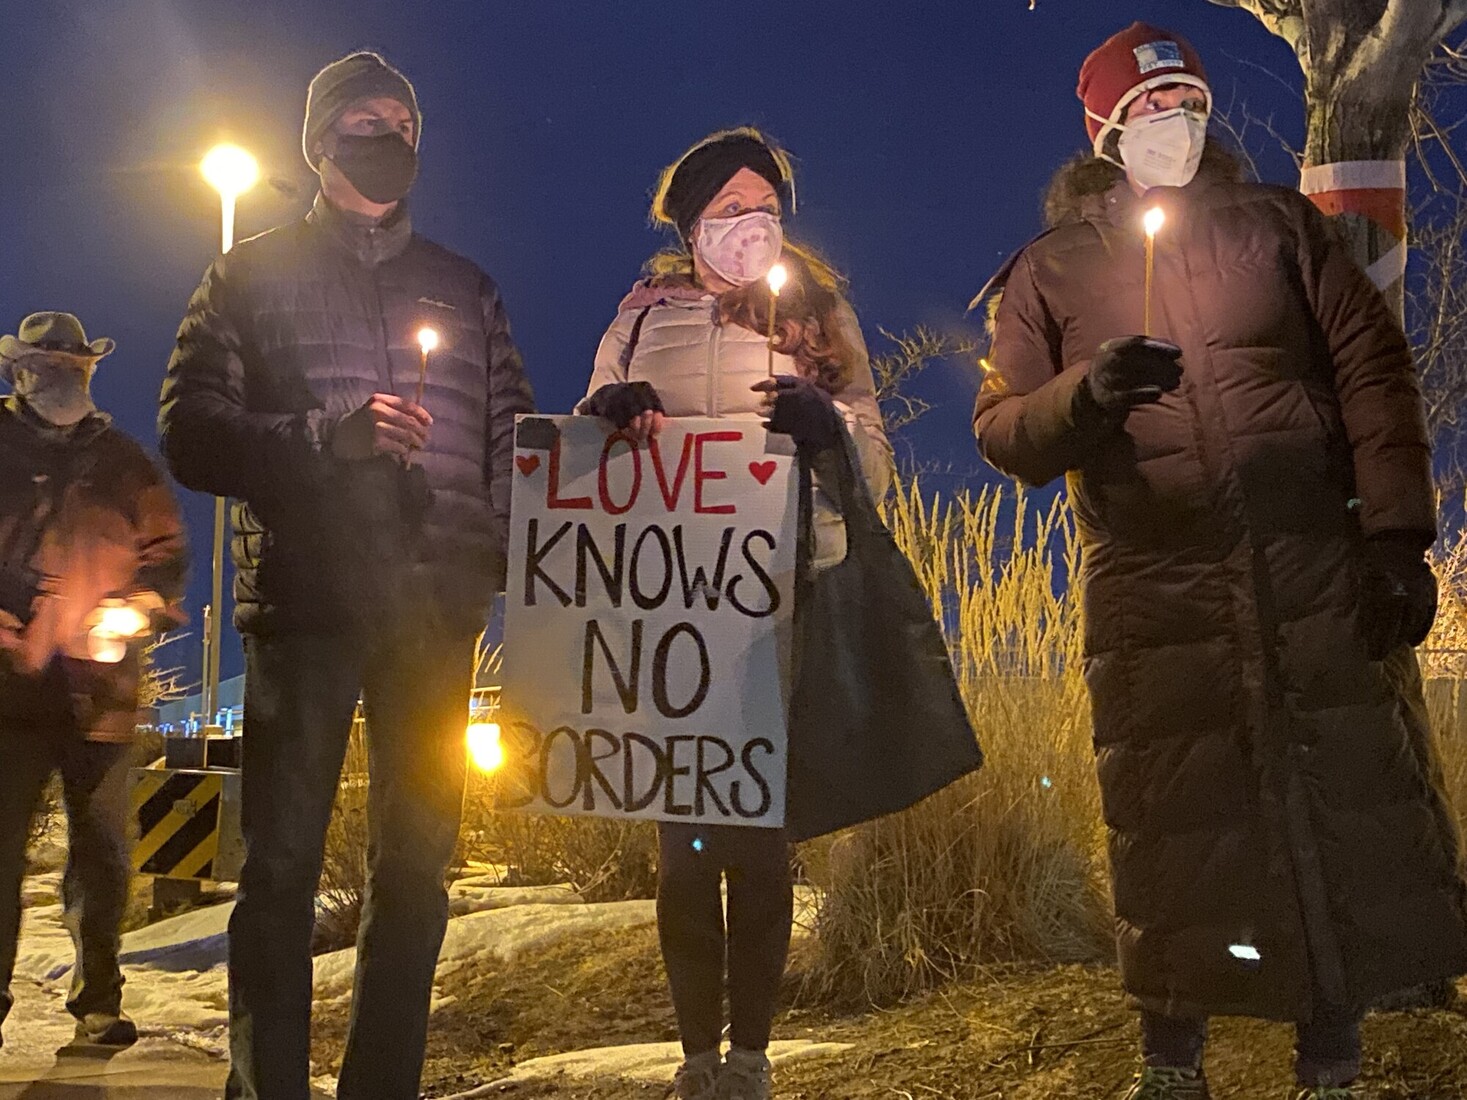 A group of people stand together, each holding candles. One person holds a sign that reads 